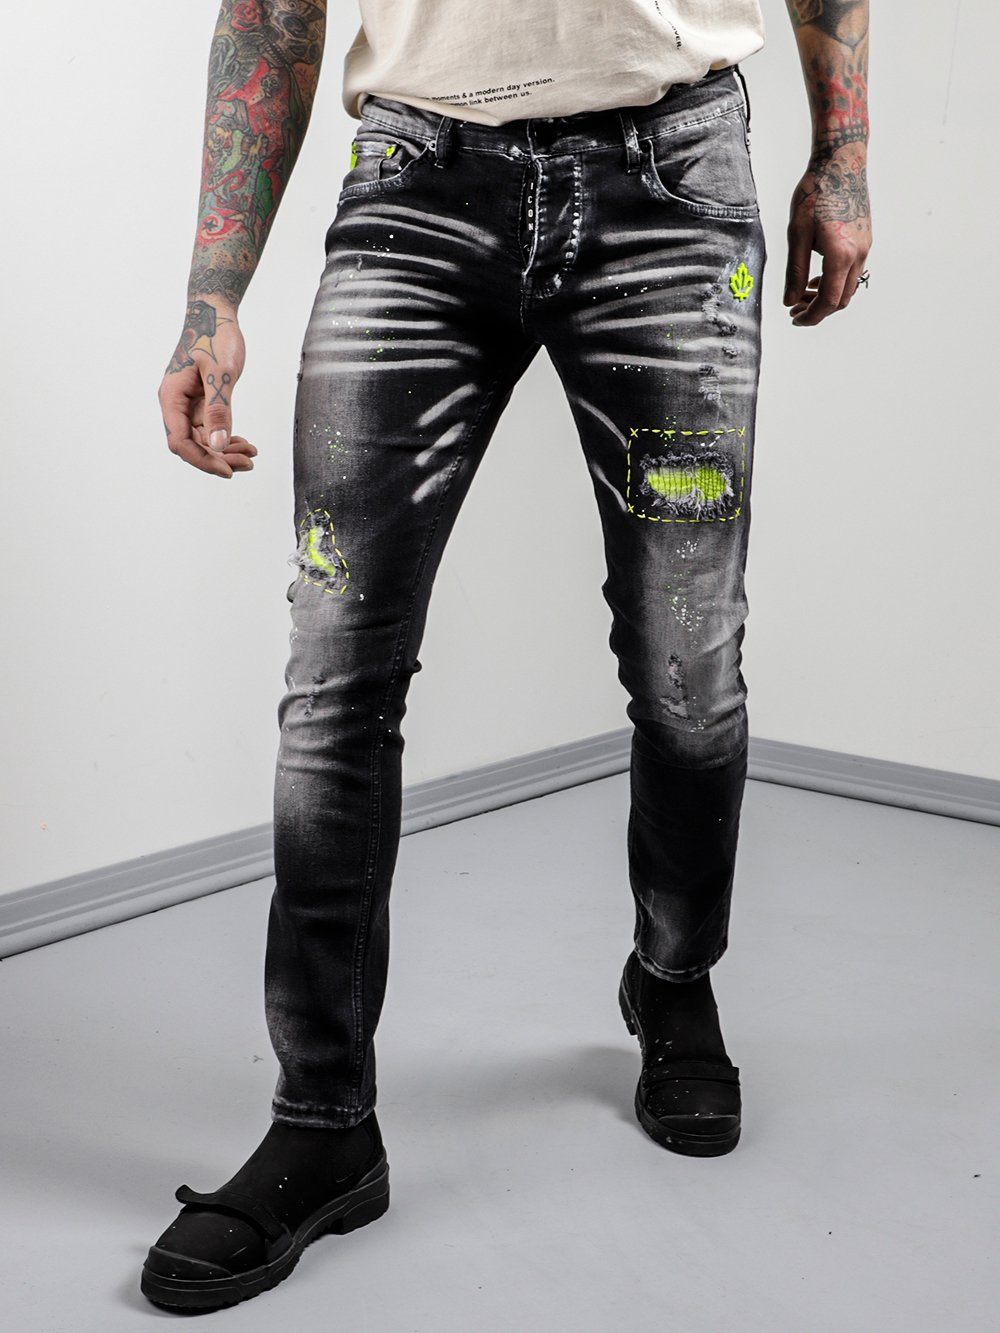 A man with tattoos and ripped jeans standing in front of a NEON TALK.